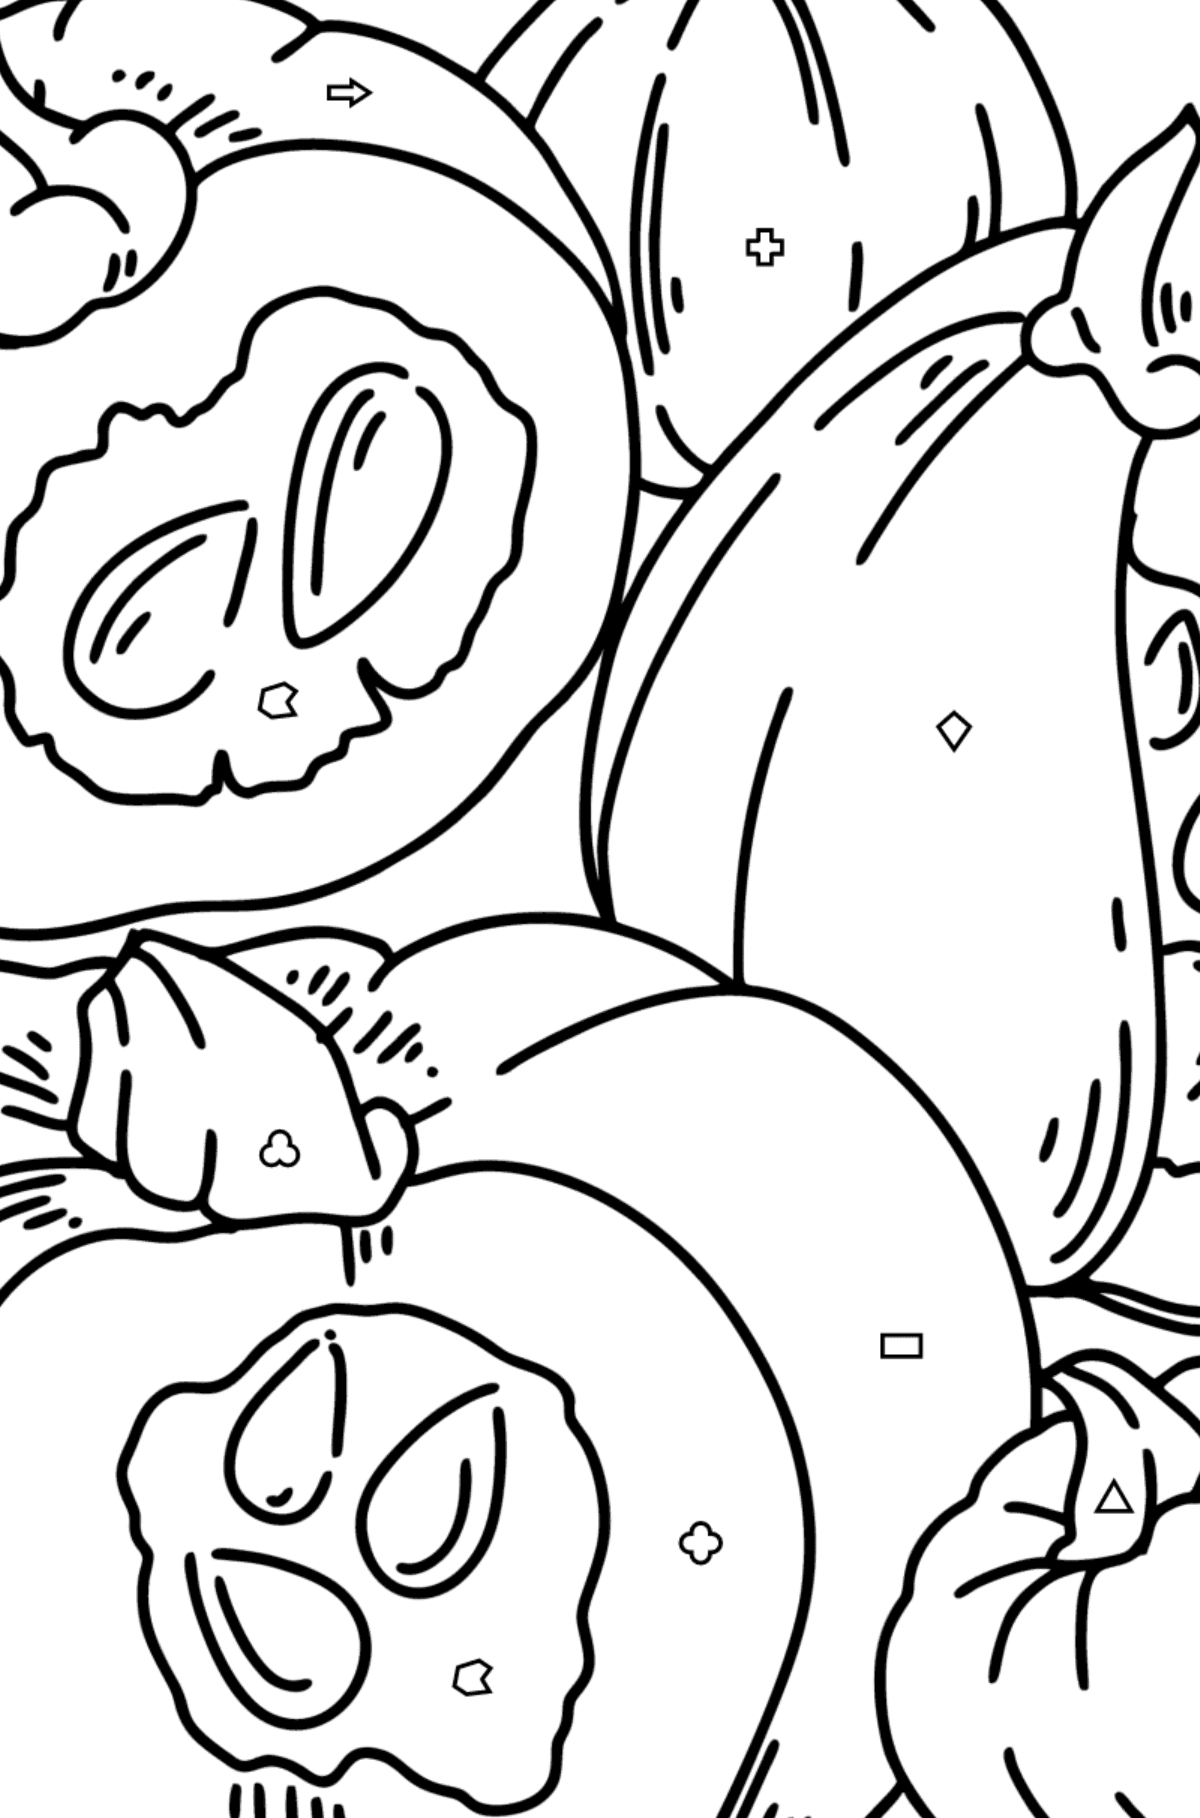 Coloring page Autumn - Pumpkin harvest - Coloring by Geometric Shapes for Kids